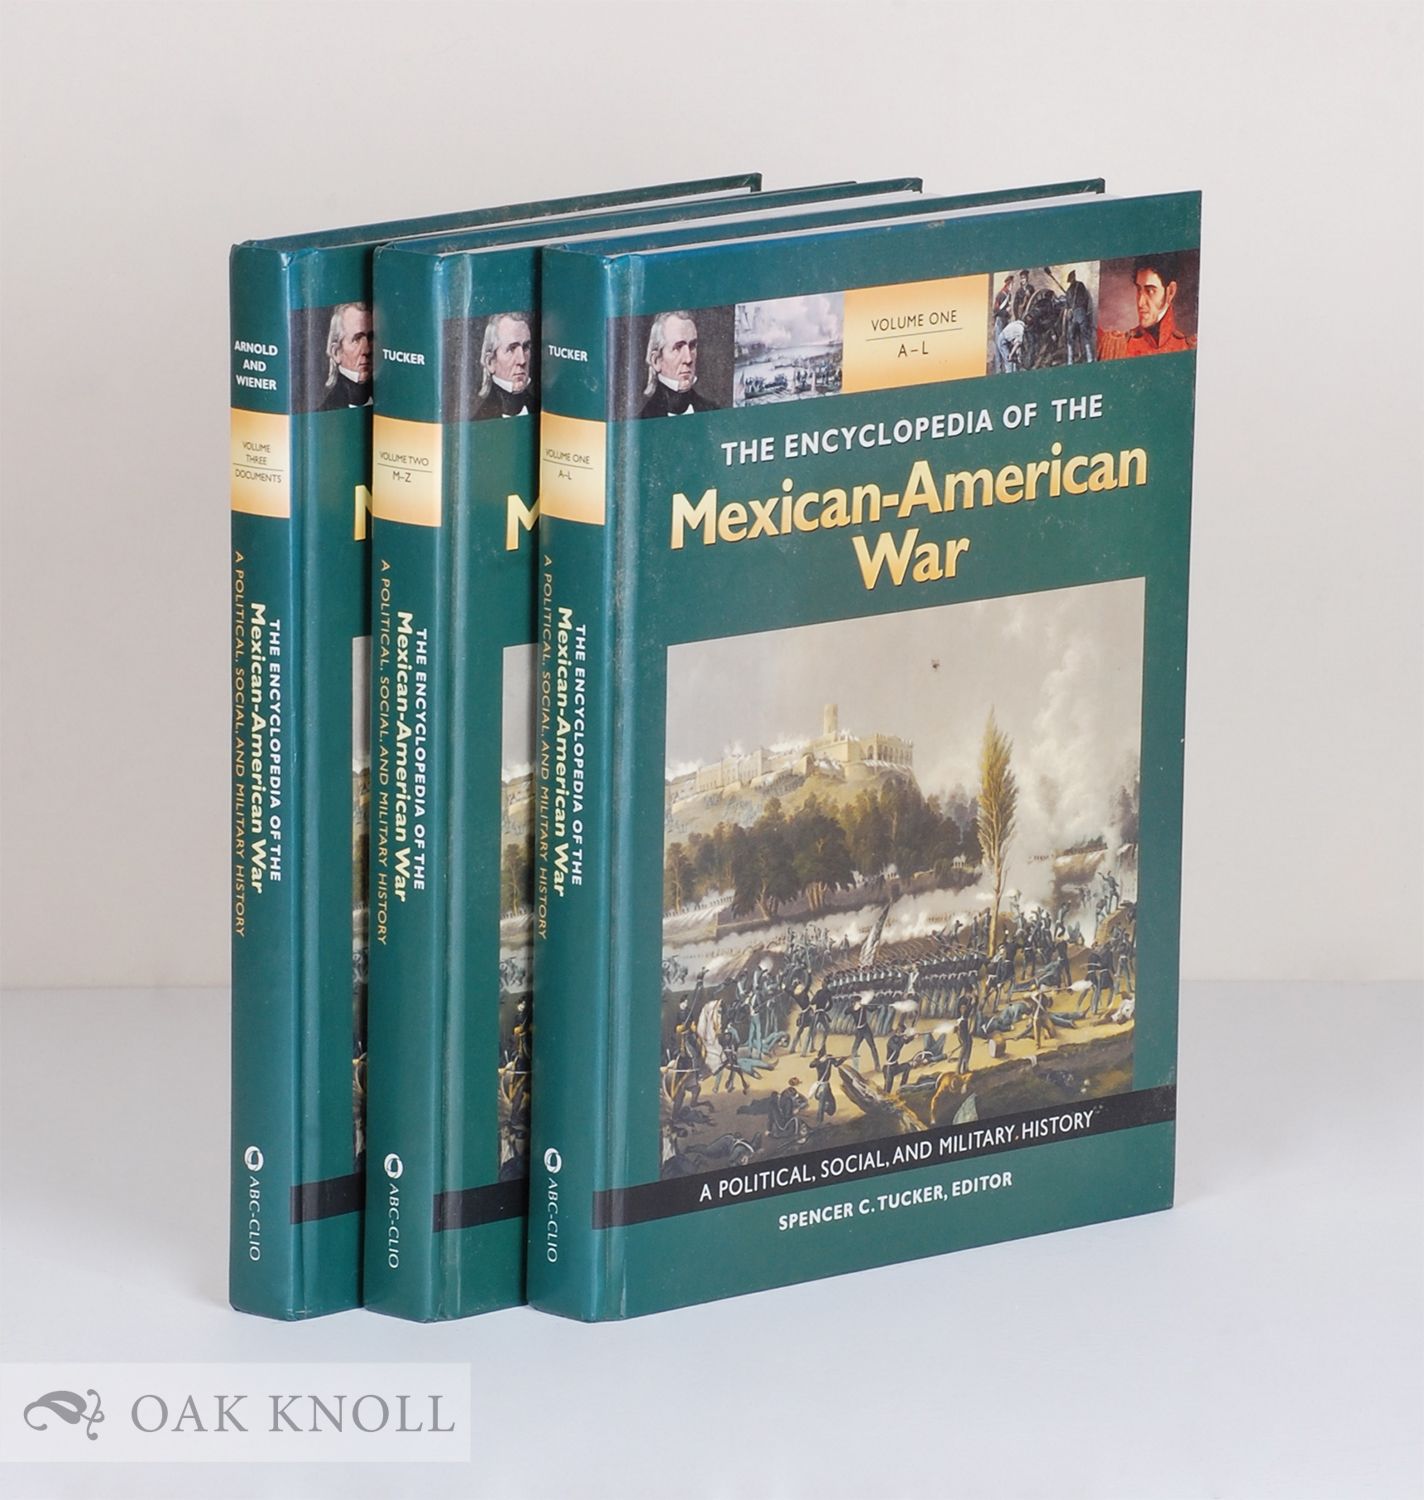 ENCYCLOPEDIA OF THE MEXICAN-AMERICAN WAR. A POLITICAL, SOCIAL, AND MILITARY HISTORY - Tucker, Spencer C. (editor)